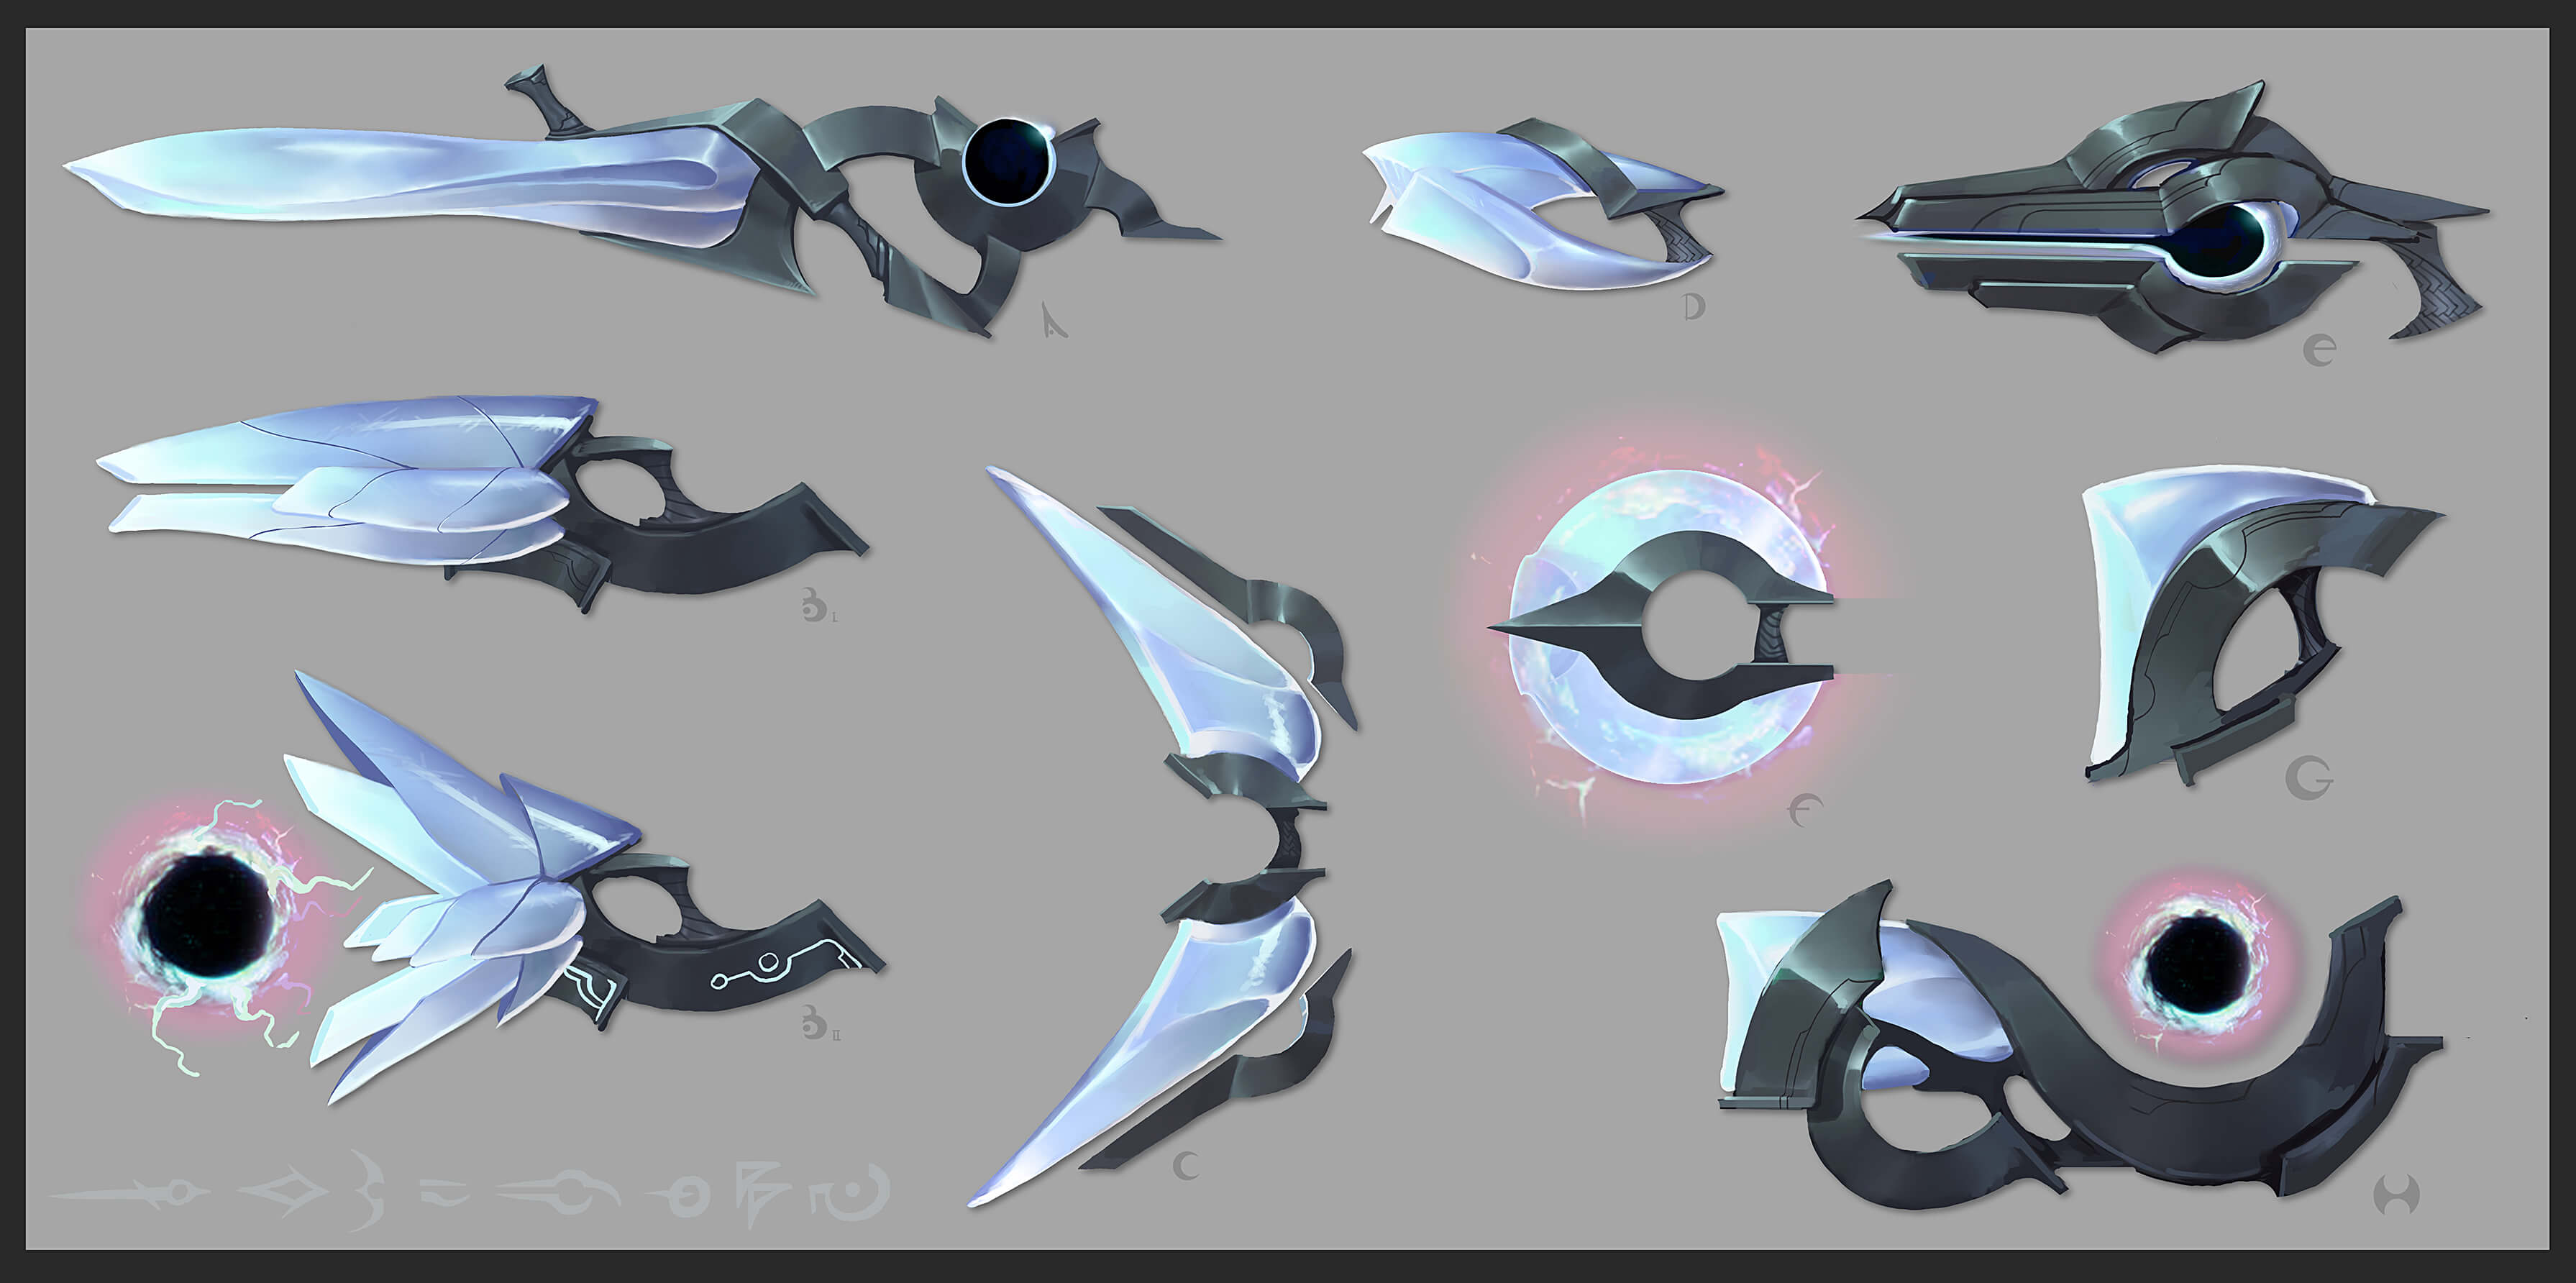 A few of Aphelios’ weapon ideations